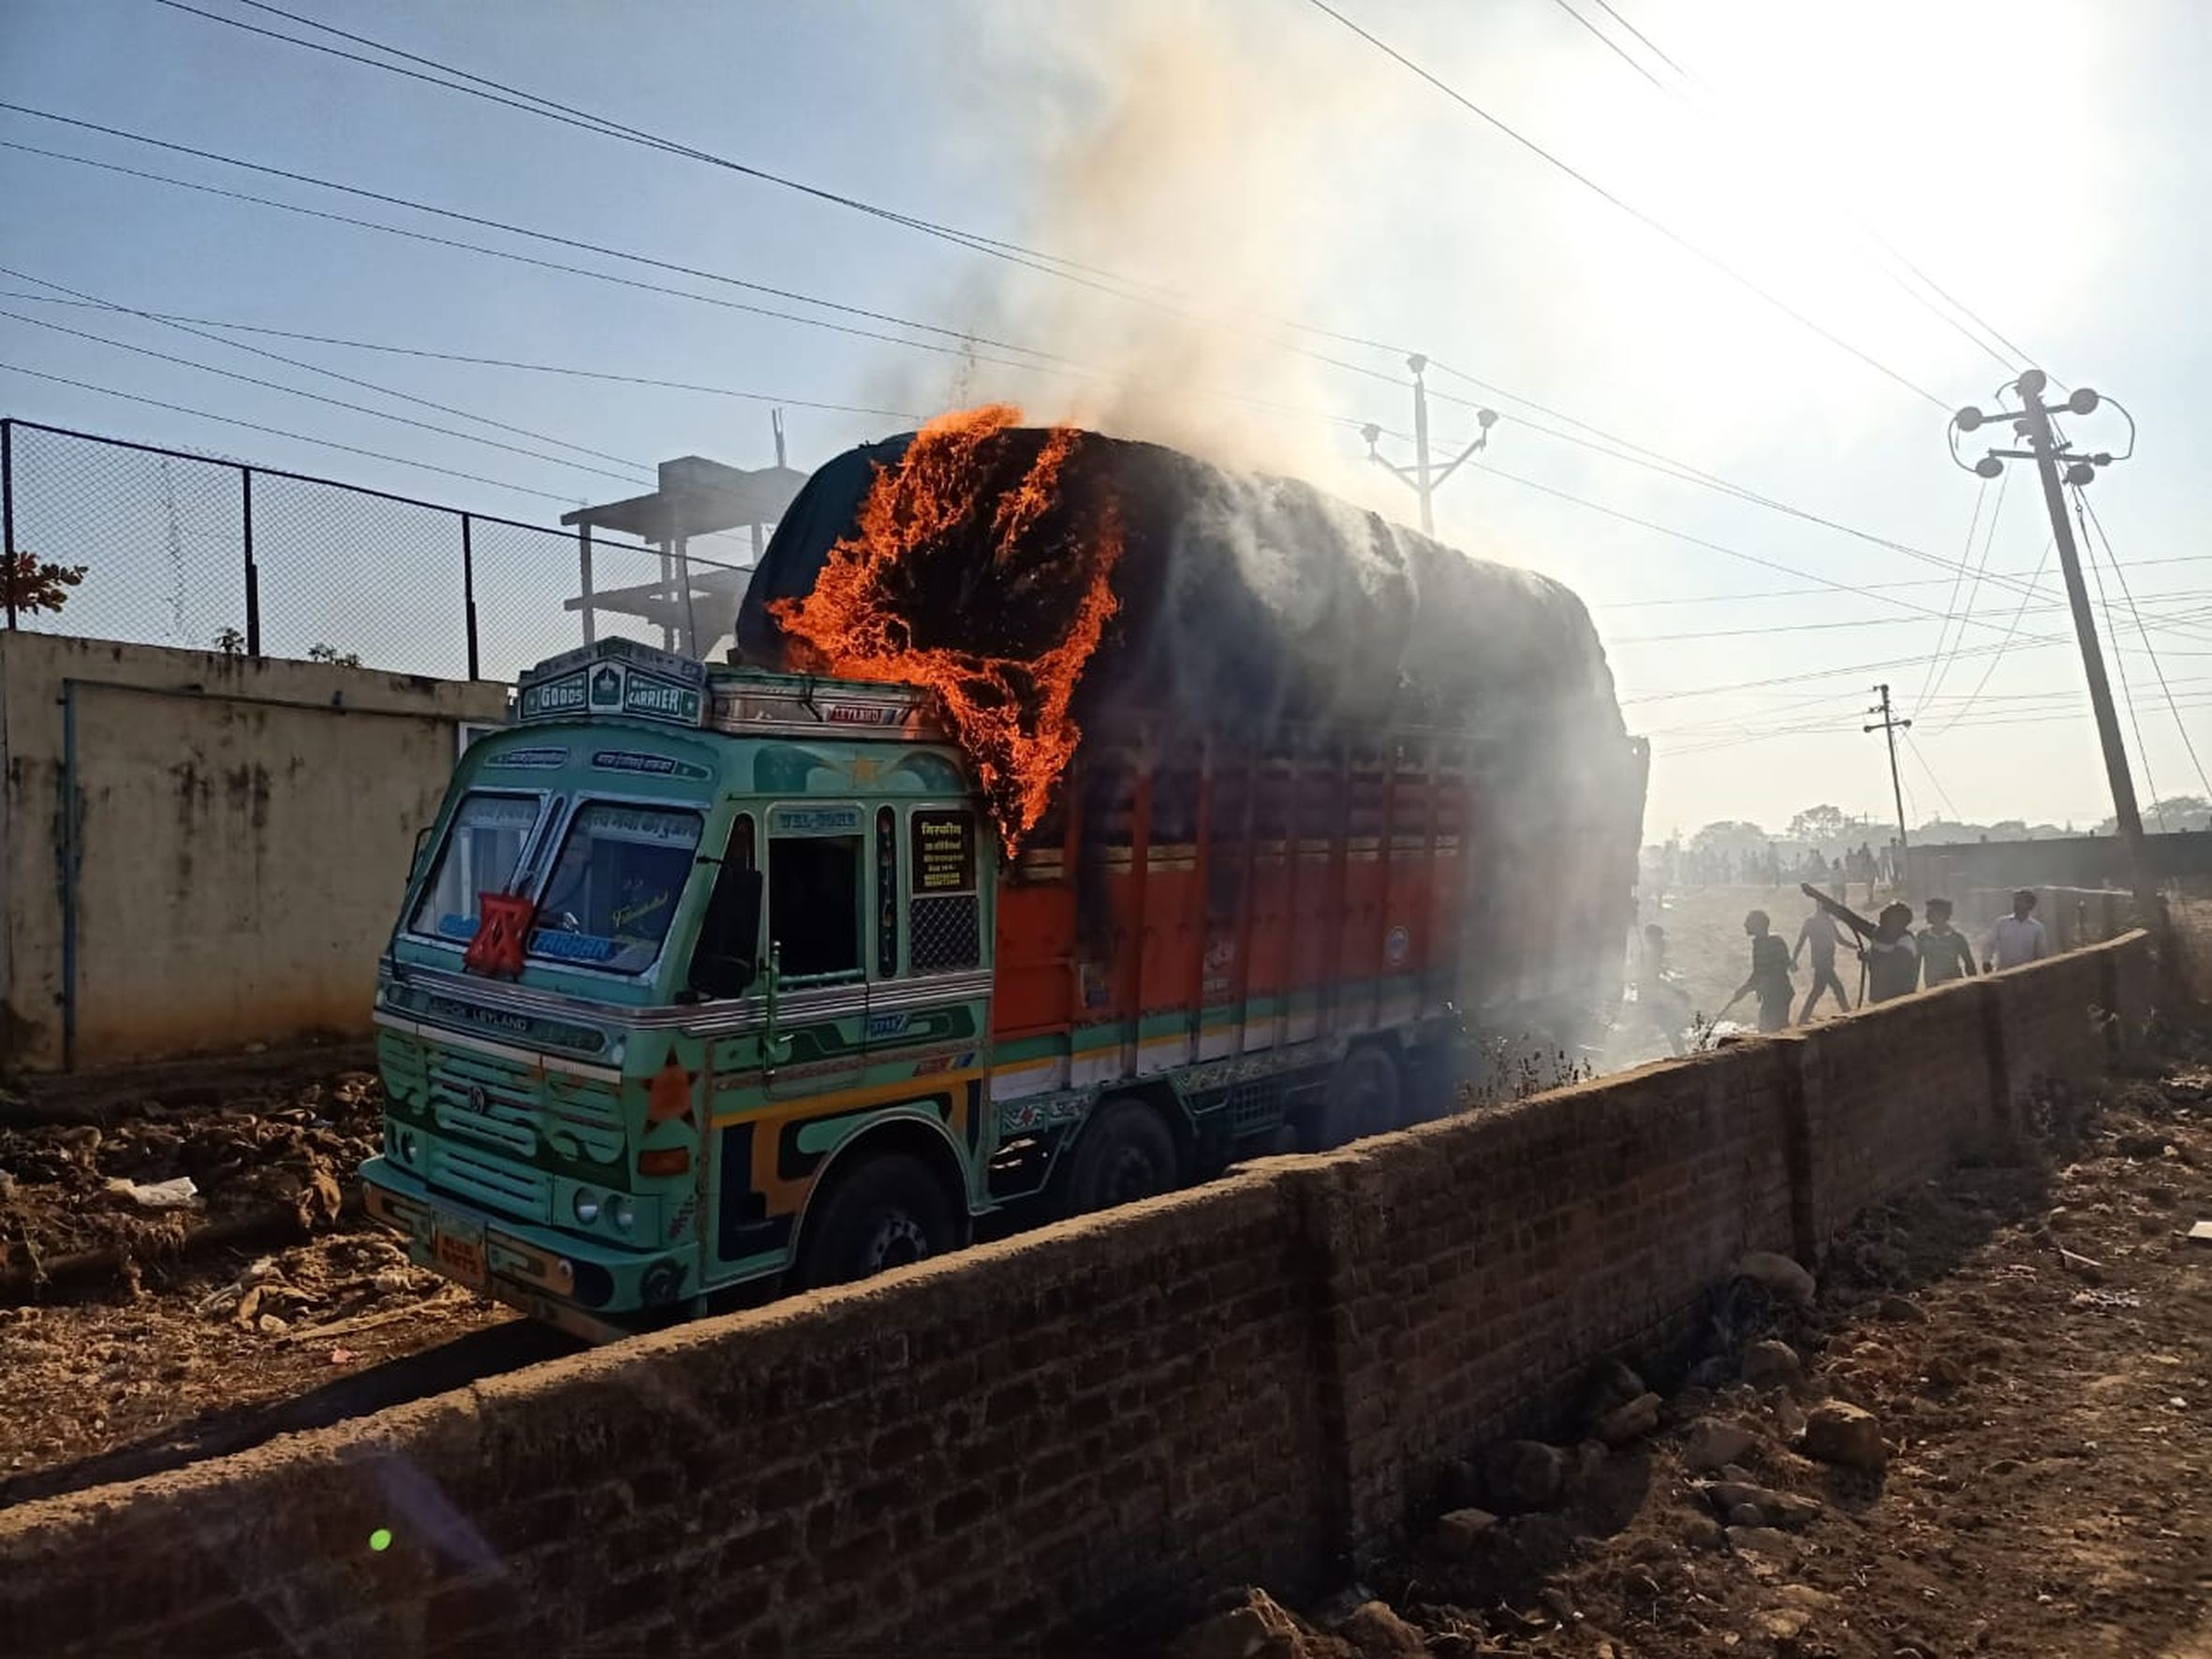 Trolley filled with cotton caught fire,Trolley filled with cotton caught fire